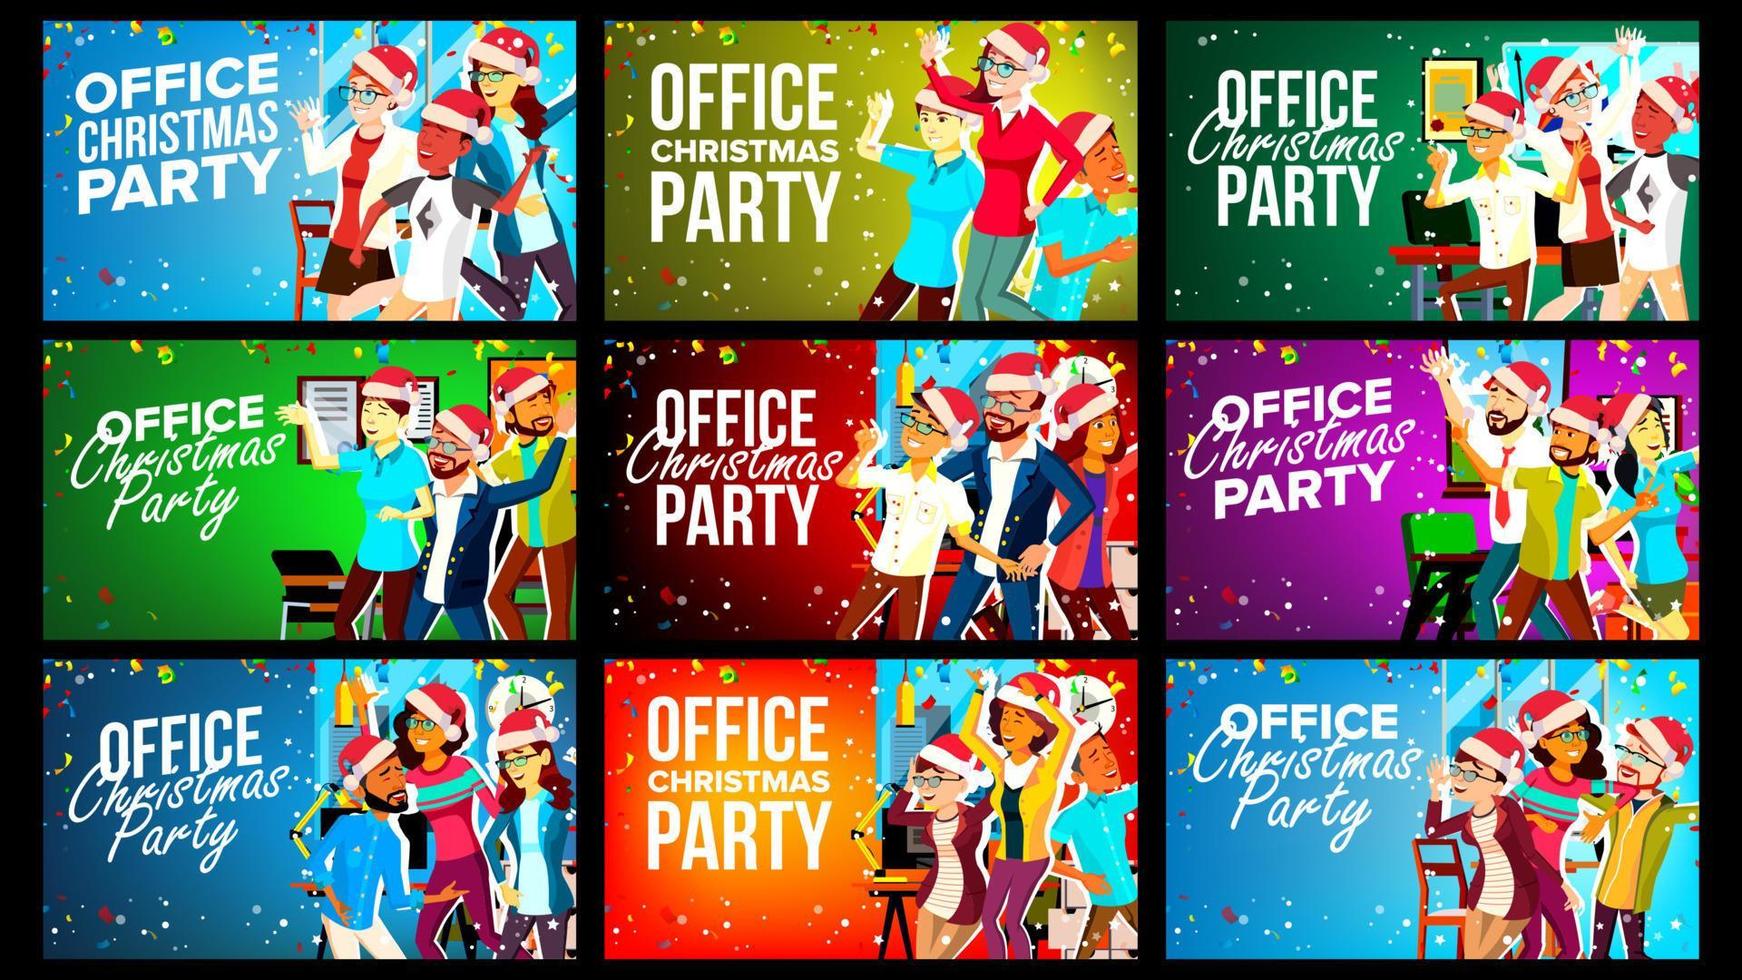 Office Christmas Party Banner Set Vector. Celebrating. Merry Christmas And Happy New Year. Having Fun. Mixed Race. Santa Hats. Friends In Office. Businesspeople Team Having Fun. Cartoon Illustration vector